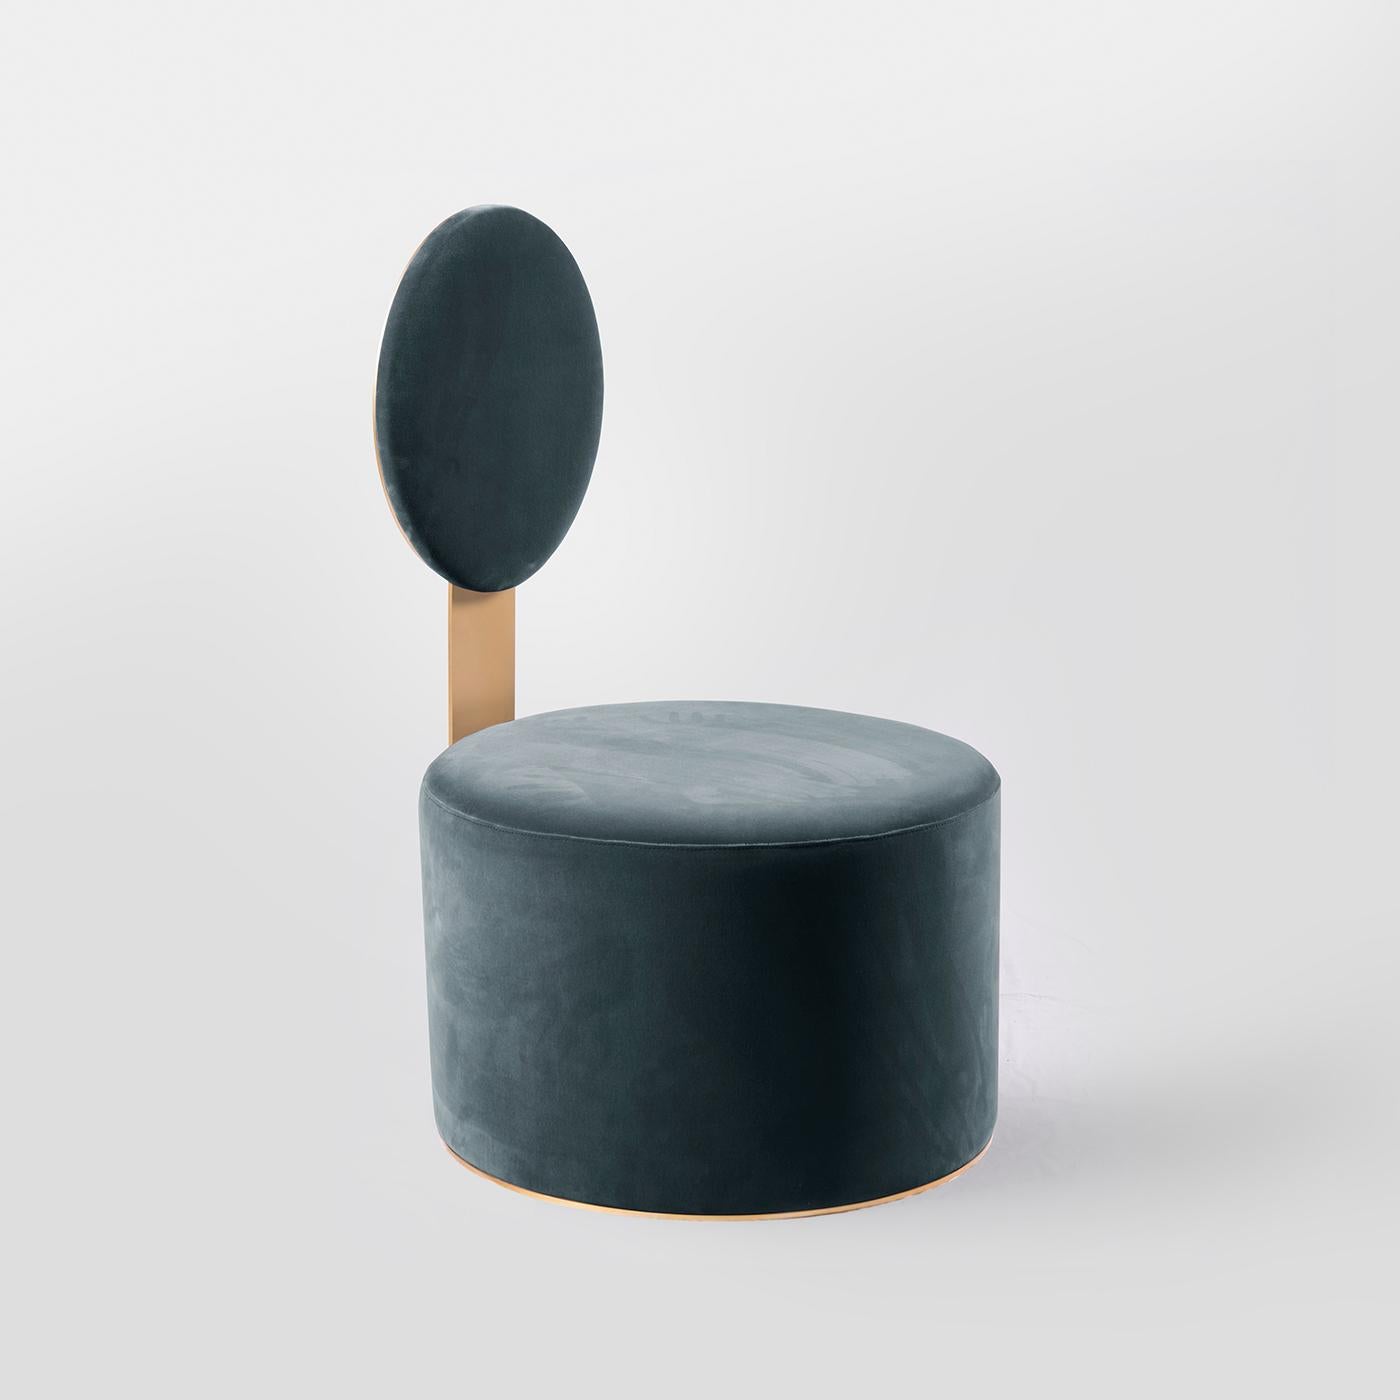 A classic design with a modern and stylish twist, this refined pouf will be a sophisticated accent in a minimalist or post-modern living room or bedroom decor. The round wooden frame is upholstered in an ash-blue velvet, which is mirrored in the